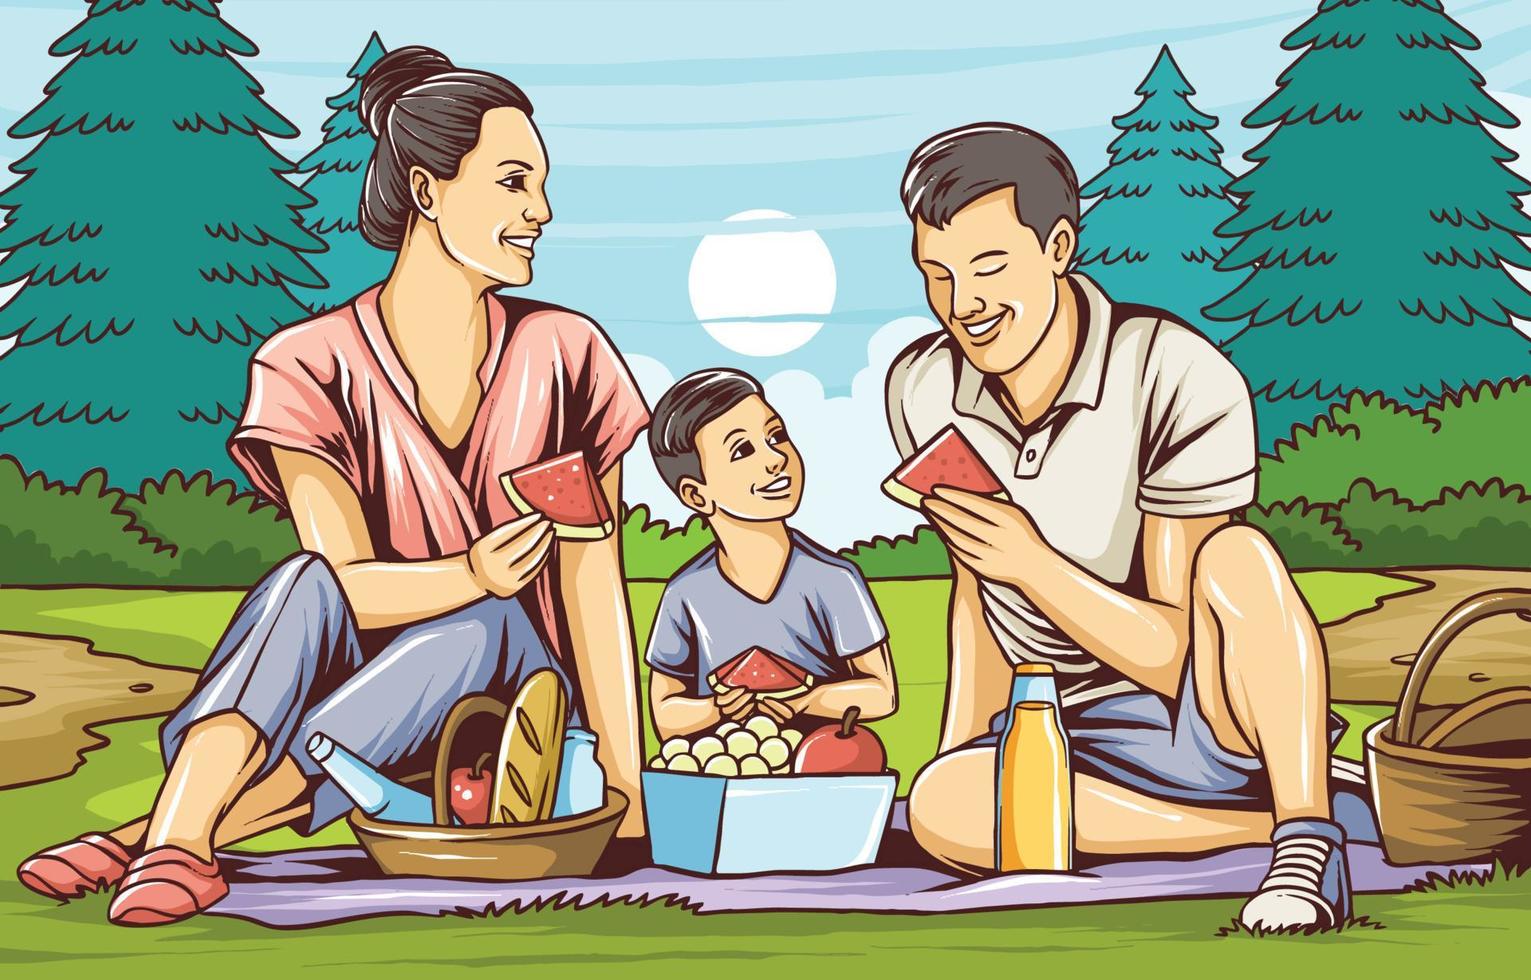 Family Vacation Picnic Activity Concept vector